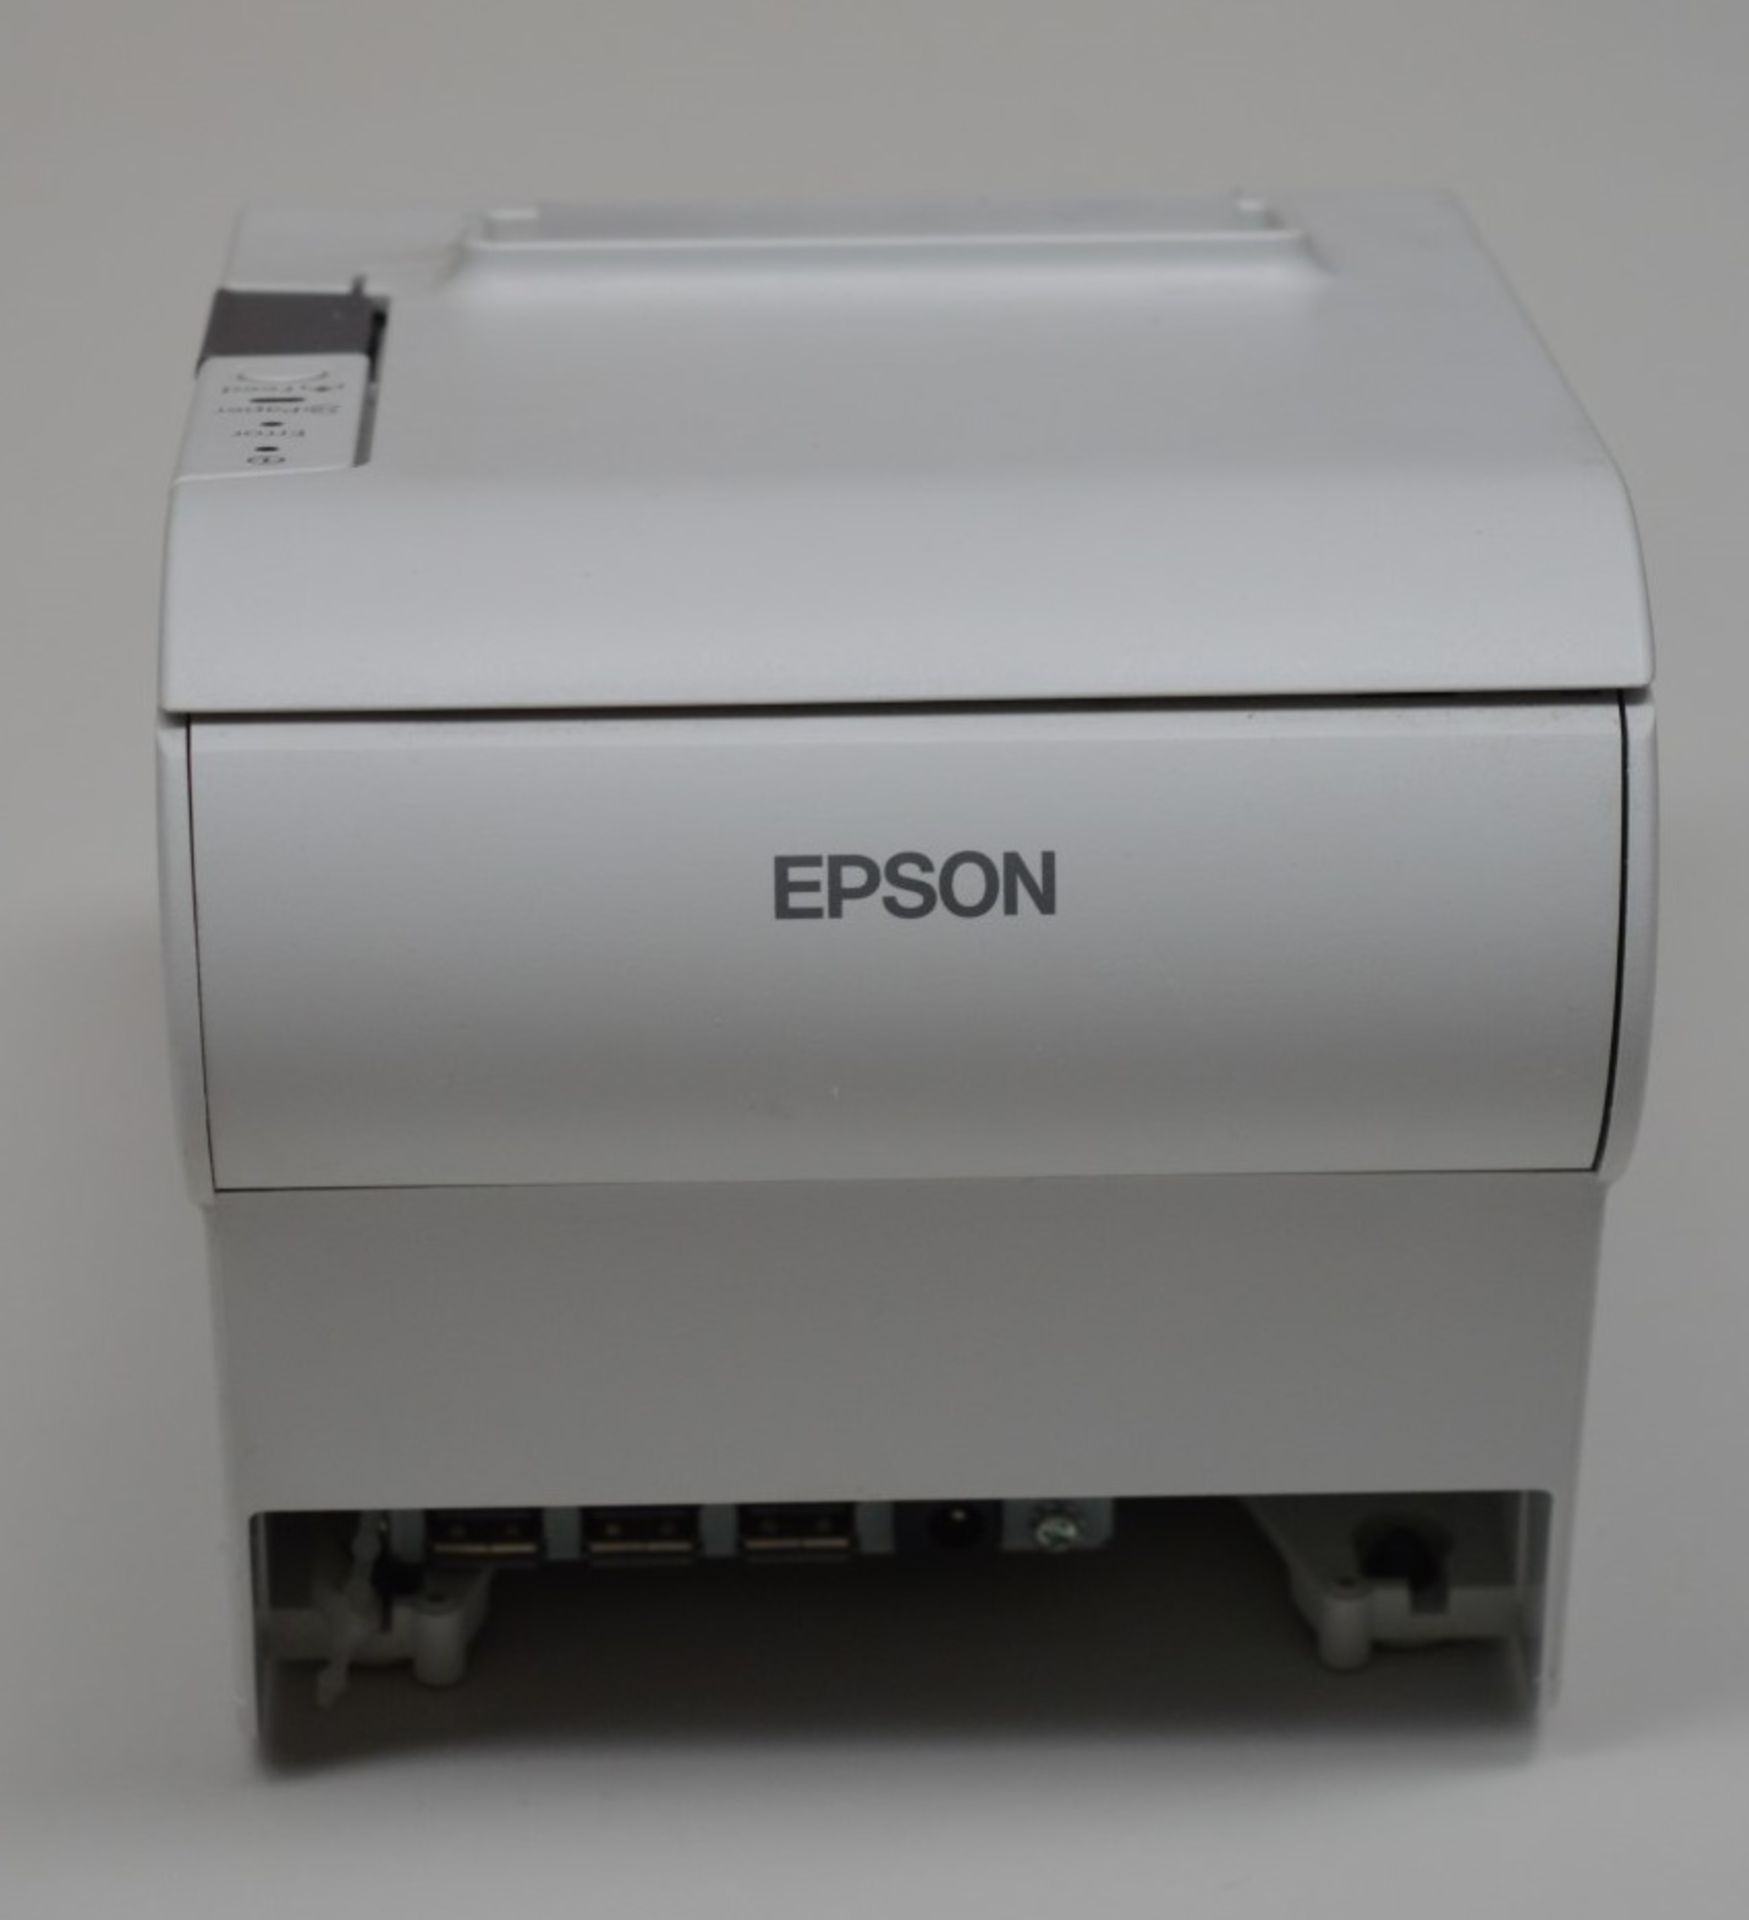 1 x Epson TM-T88VI Intelligent Thermal Receipt Printer - CL164 - Ref CAT023 - RRP Approx £400 - - Image 6 of 10